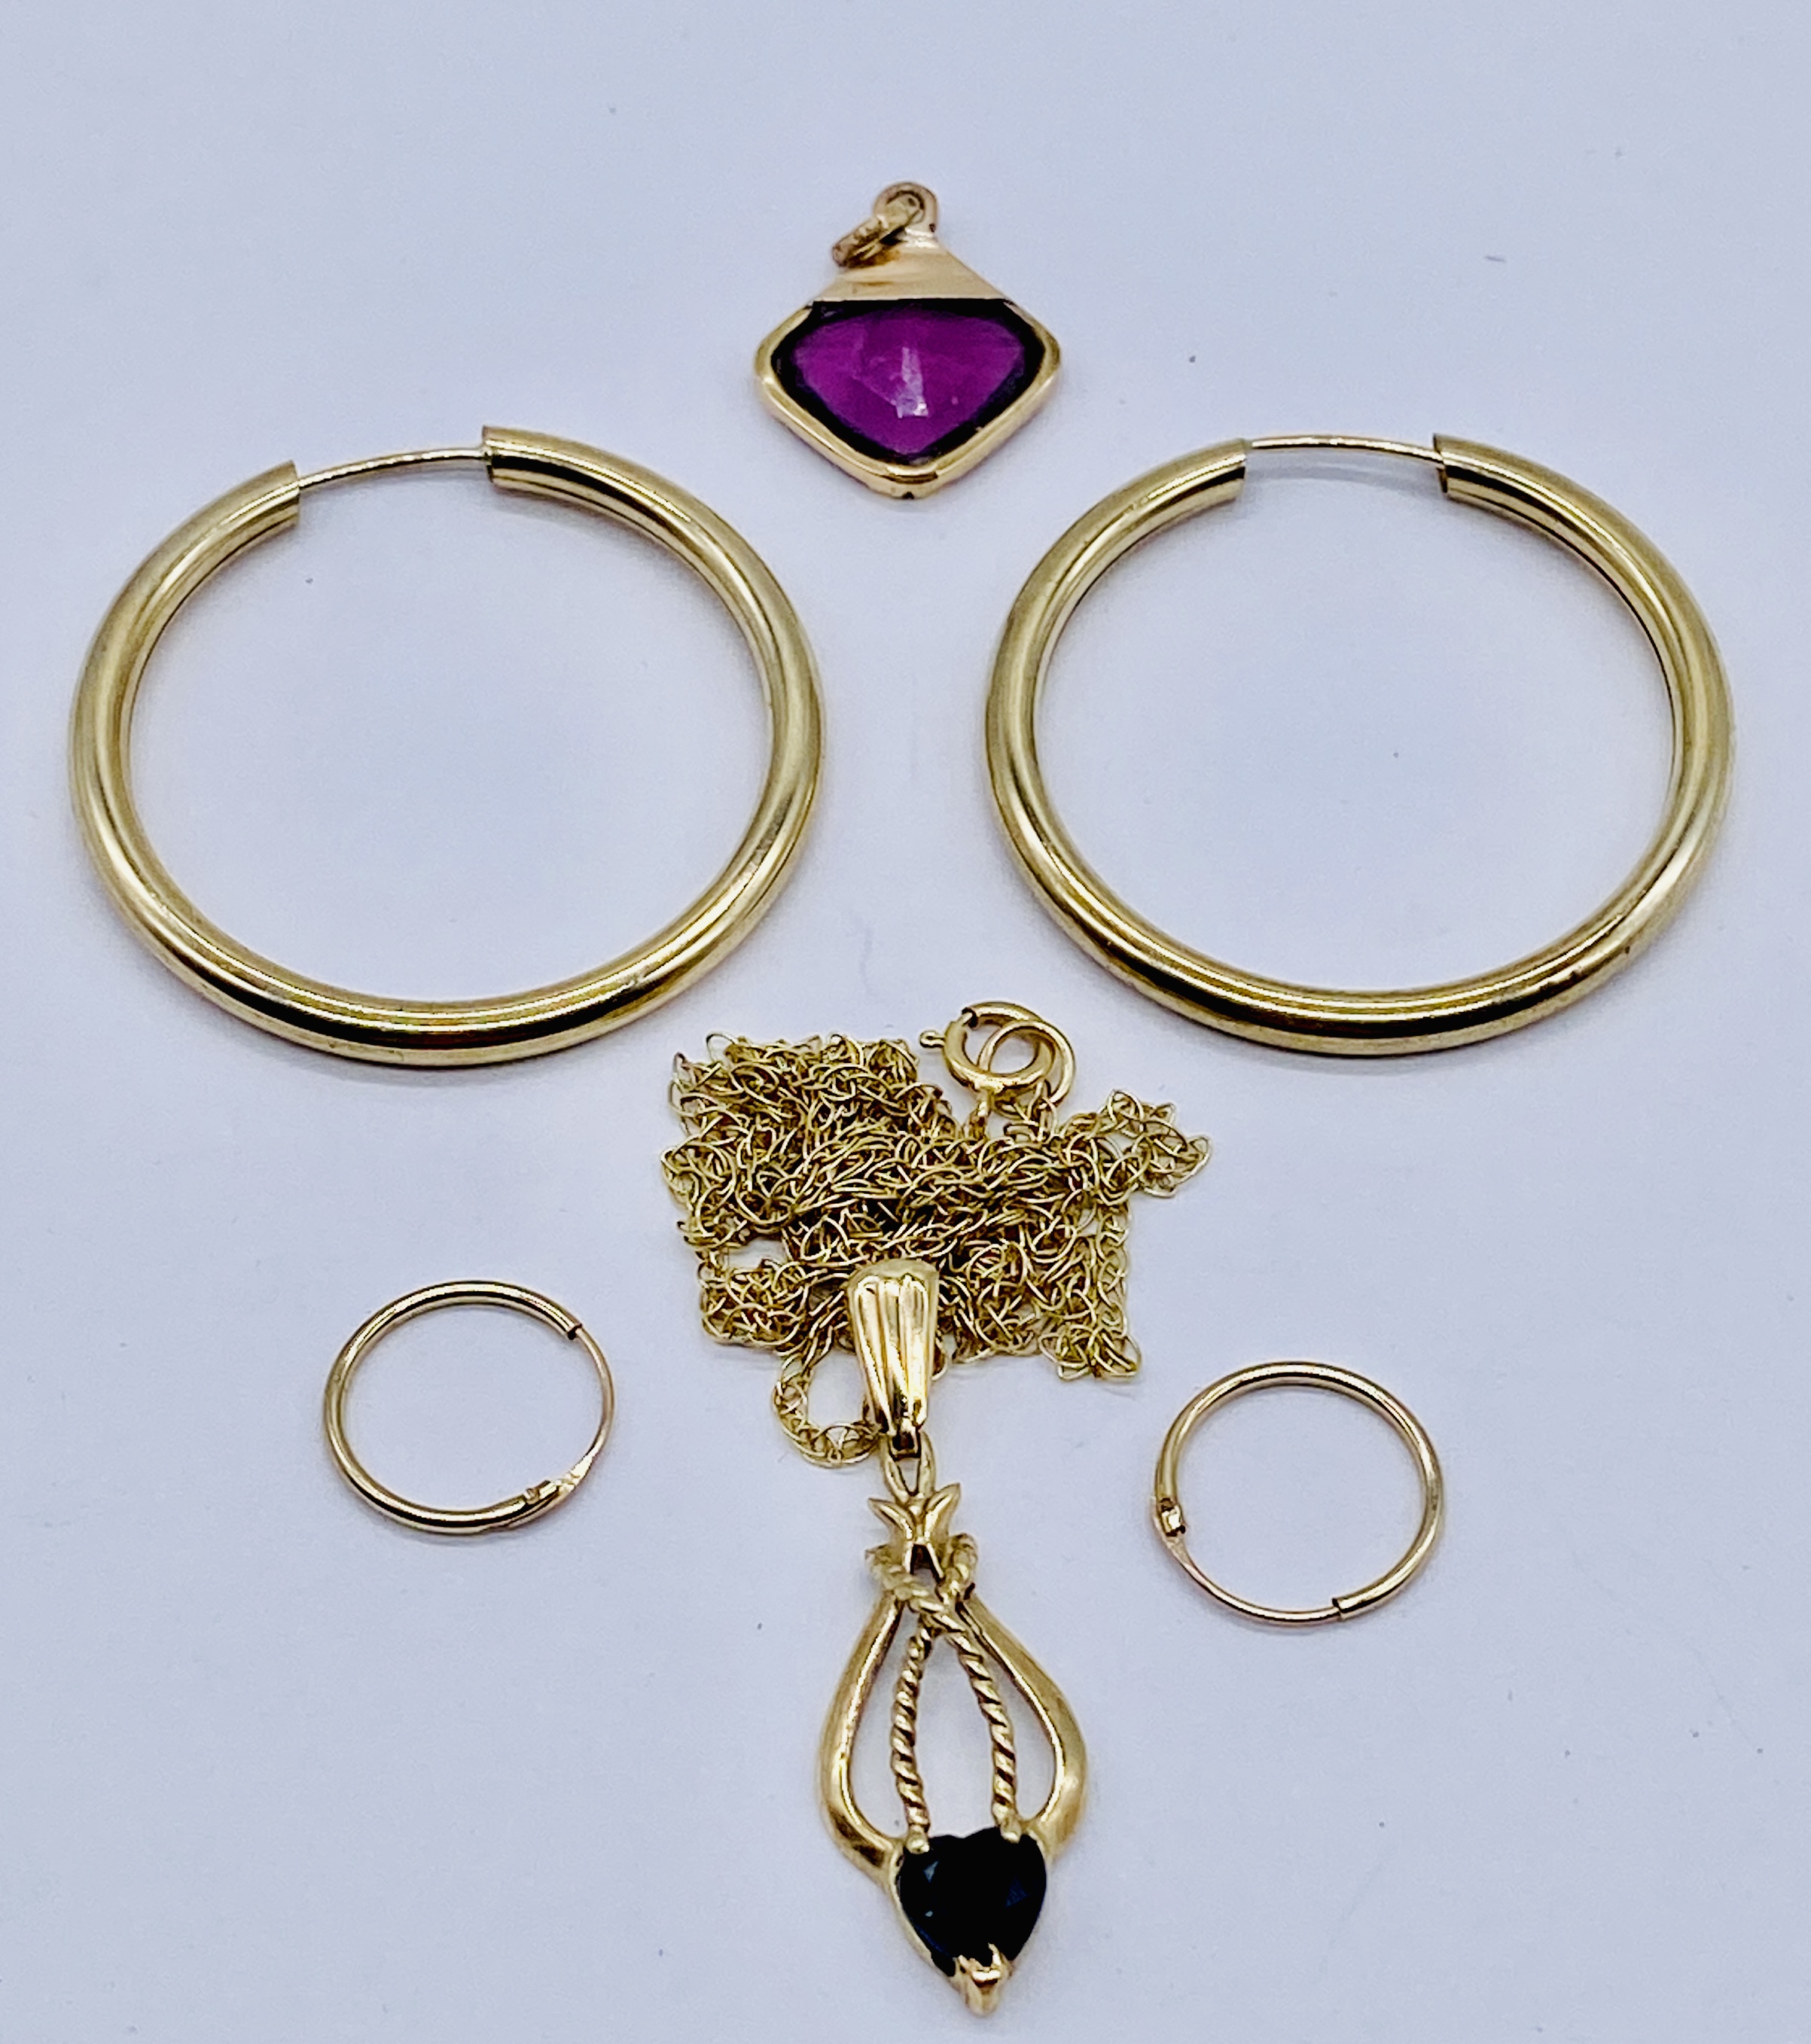 Two pairs of unmarked gold hoop earrings (weight 1.7g) a 9ct gold fine chain (0.8g) with two